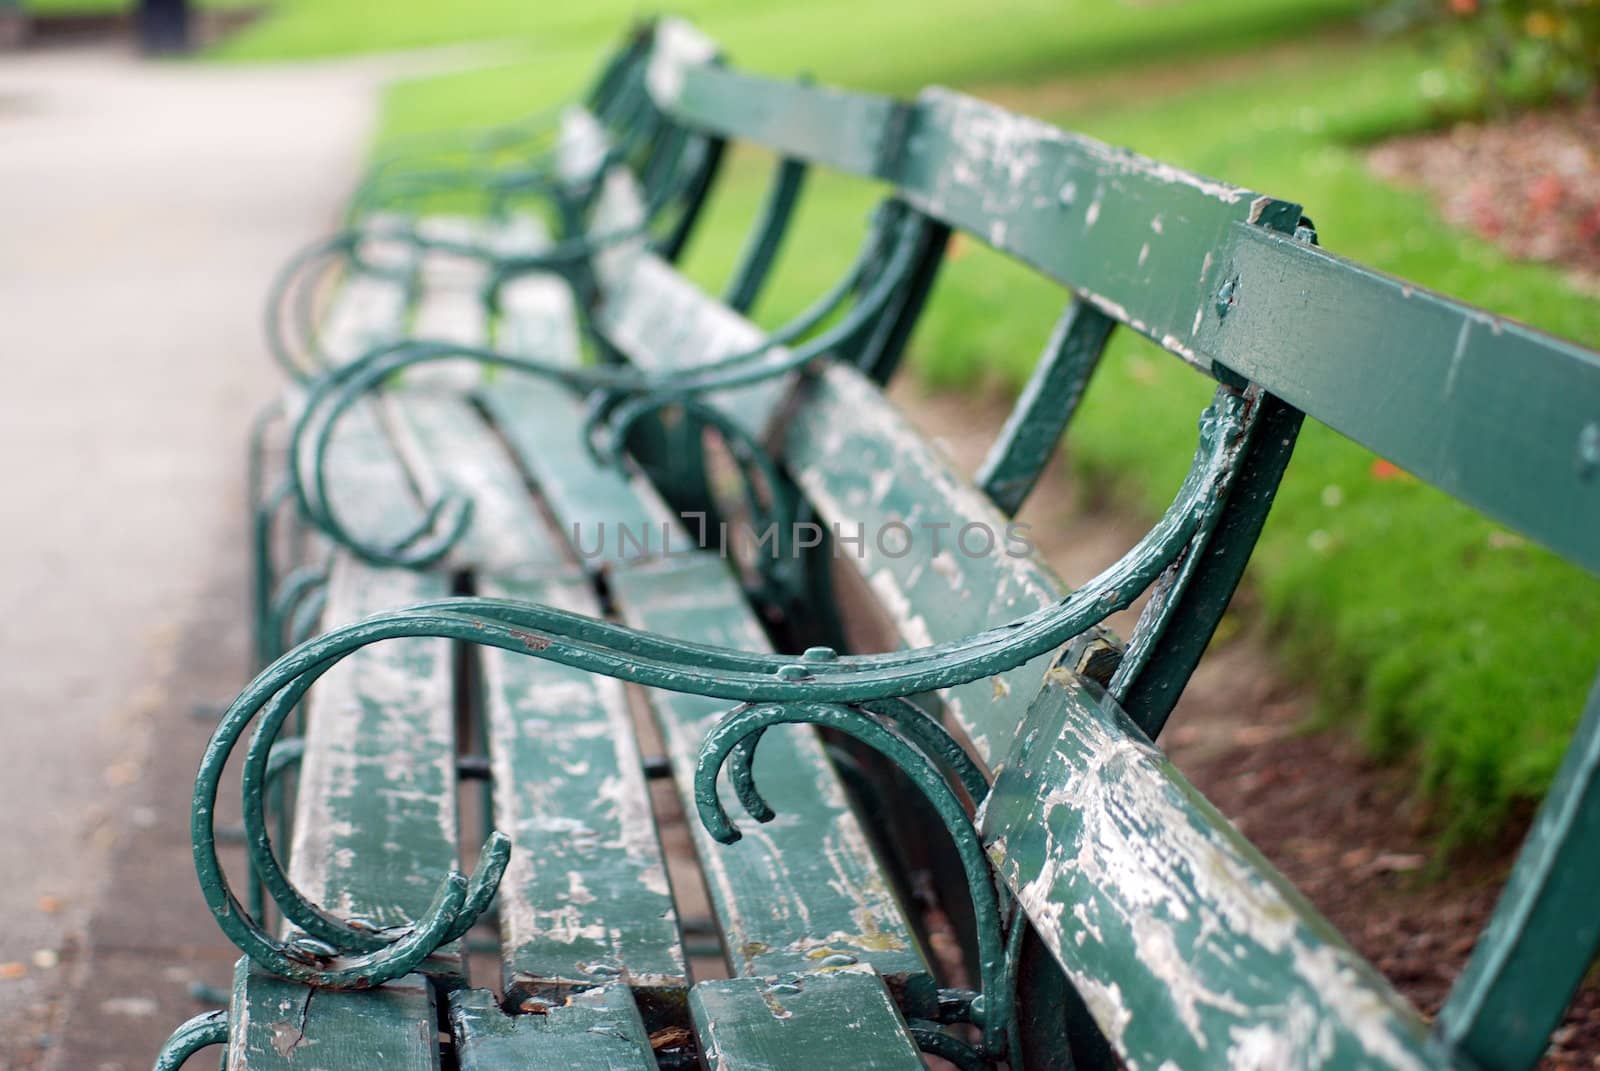 A photograph of a row of green benches with peeling paint